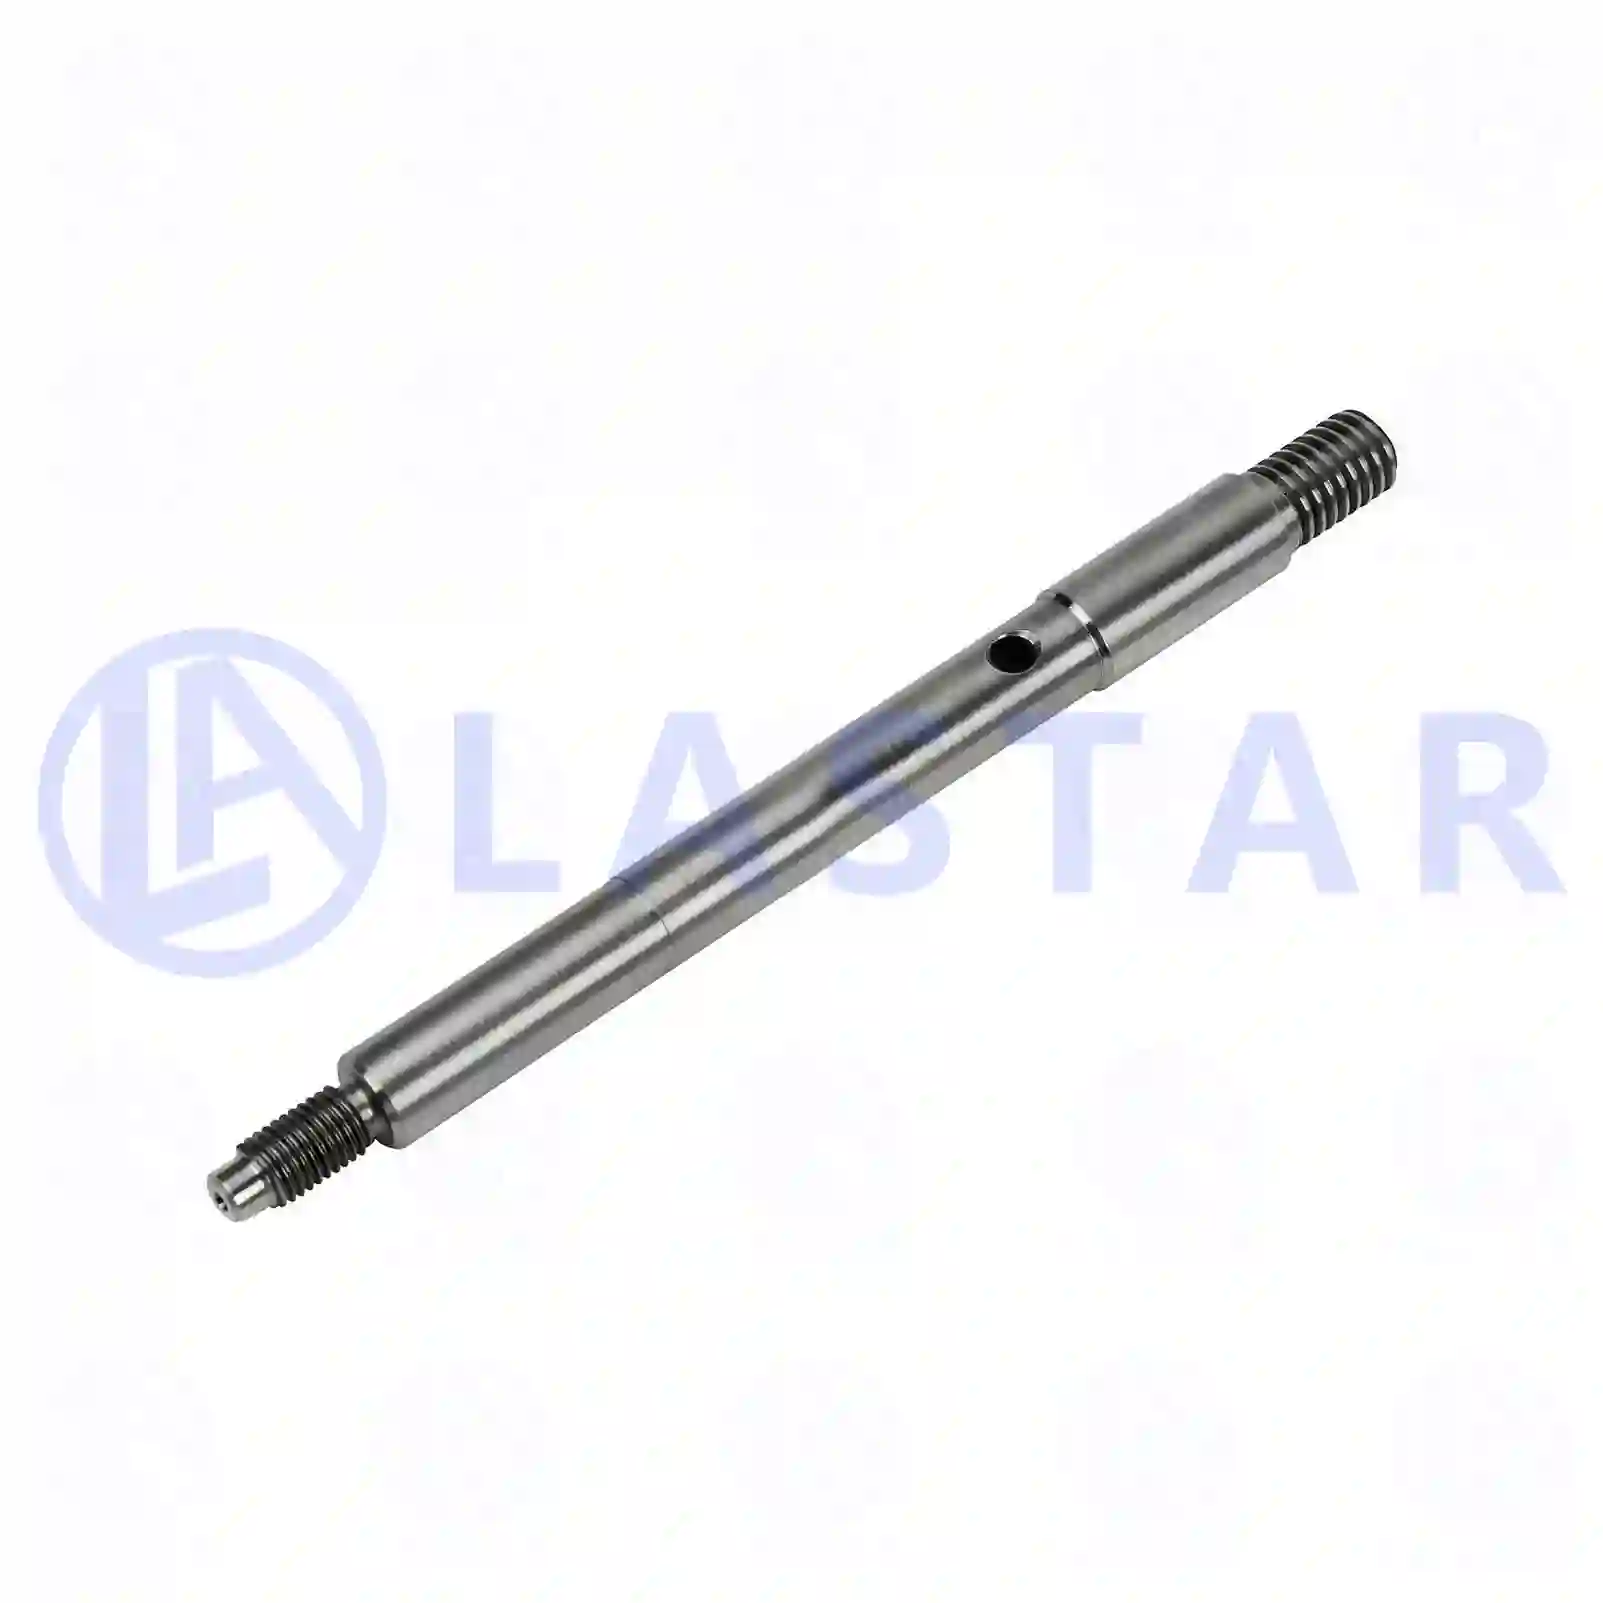 Shaft, oil cleaner, 77701576, 1475436, 2304243, ZG02094-0008 ||  77701576 Lastar Spare Part | Truck Spare Parts, Auotomotive Spare Parts Shaft, oil cleaner, 77701576, 1475436, 2304243, ZG02094-0008 ||  77701576 Lastar Spare Part | Truck Spare Parts, Auotomotive Spare Parts